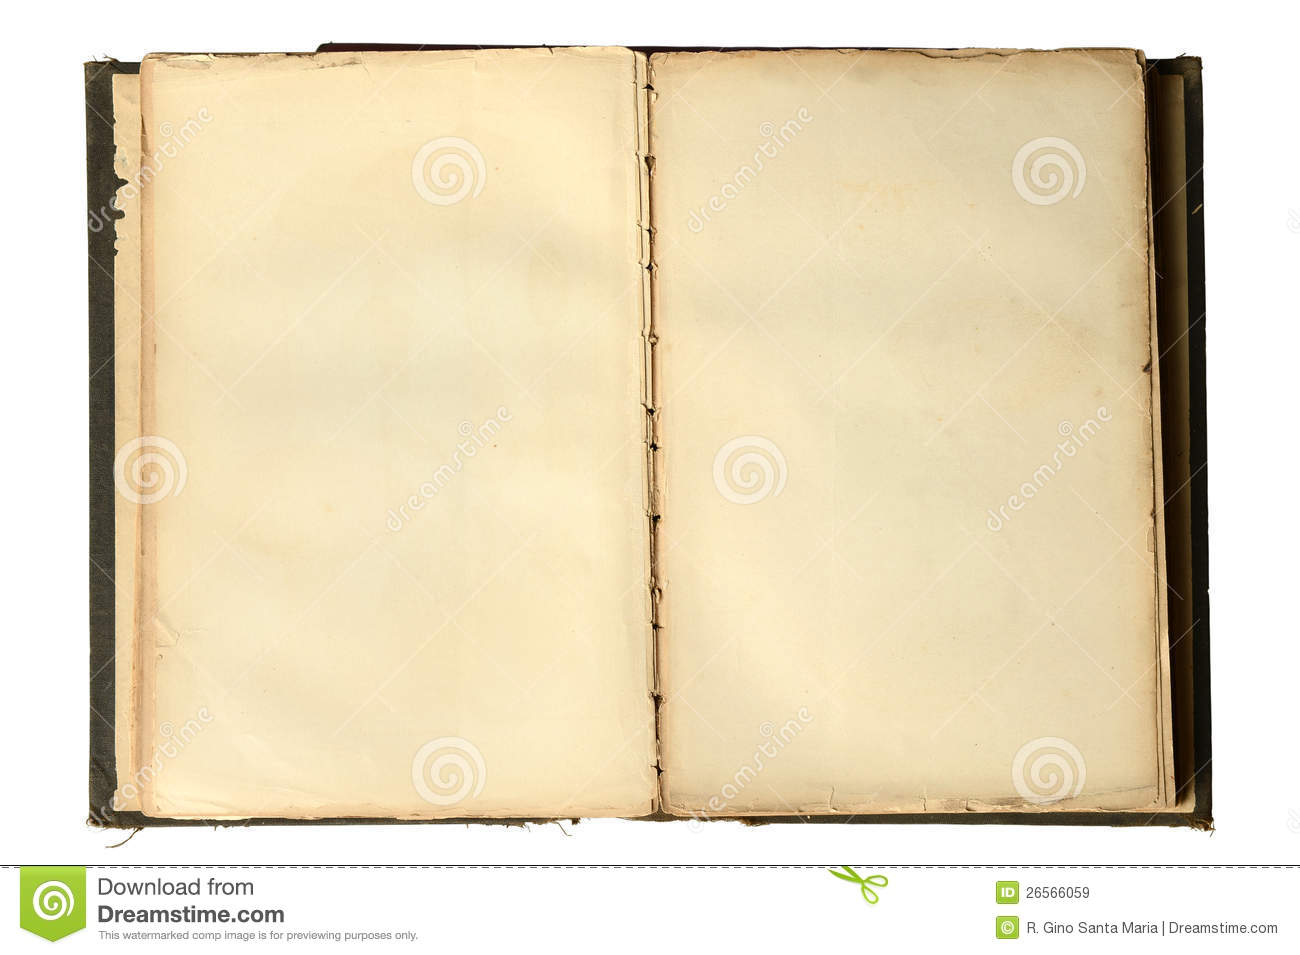 Open Vintage Book With Blank Pages Royalty Free Stock Images   Image